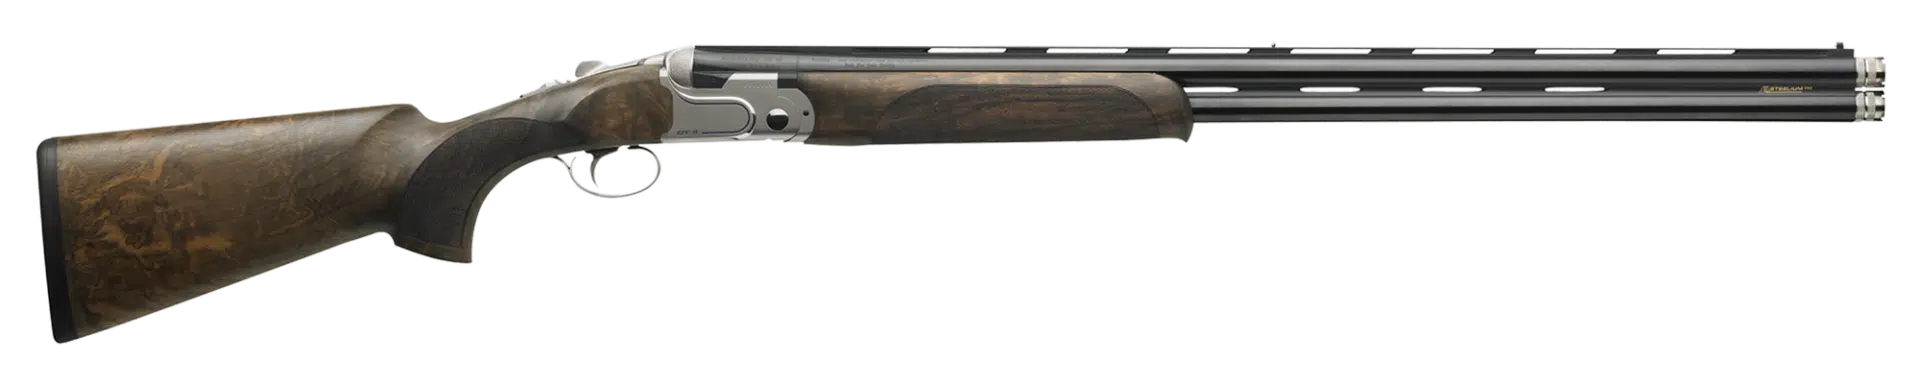 BERETTA - DT11 - SPORTING - 30" - IN STORE NOW